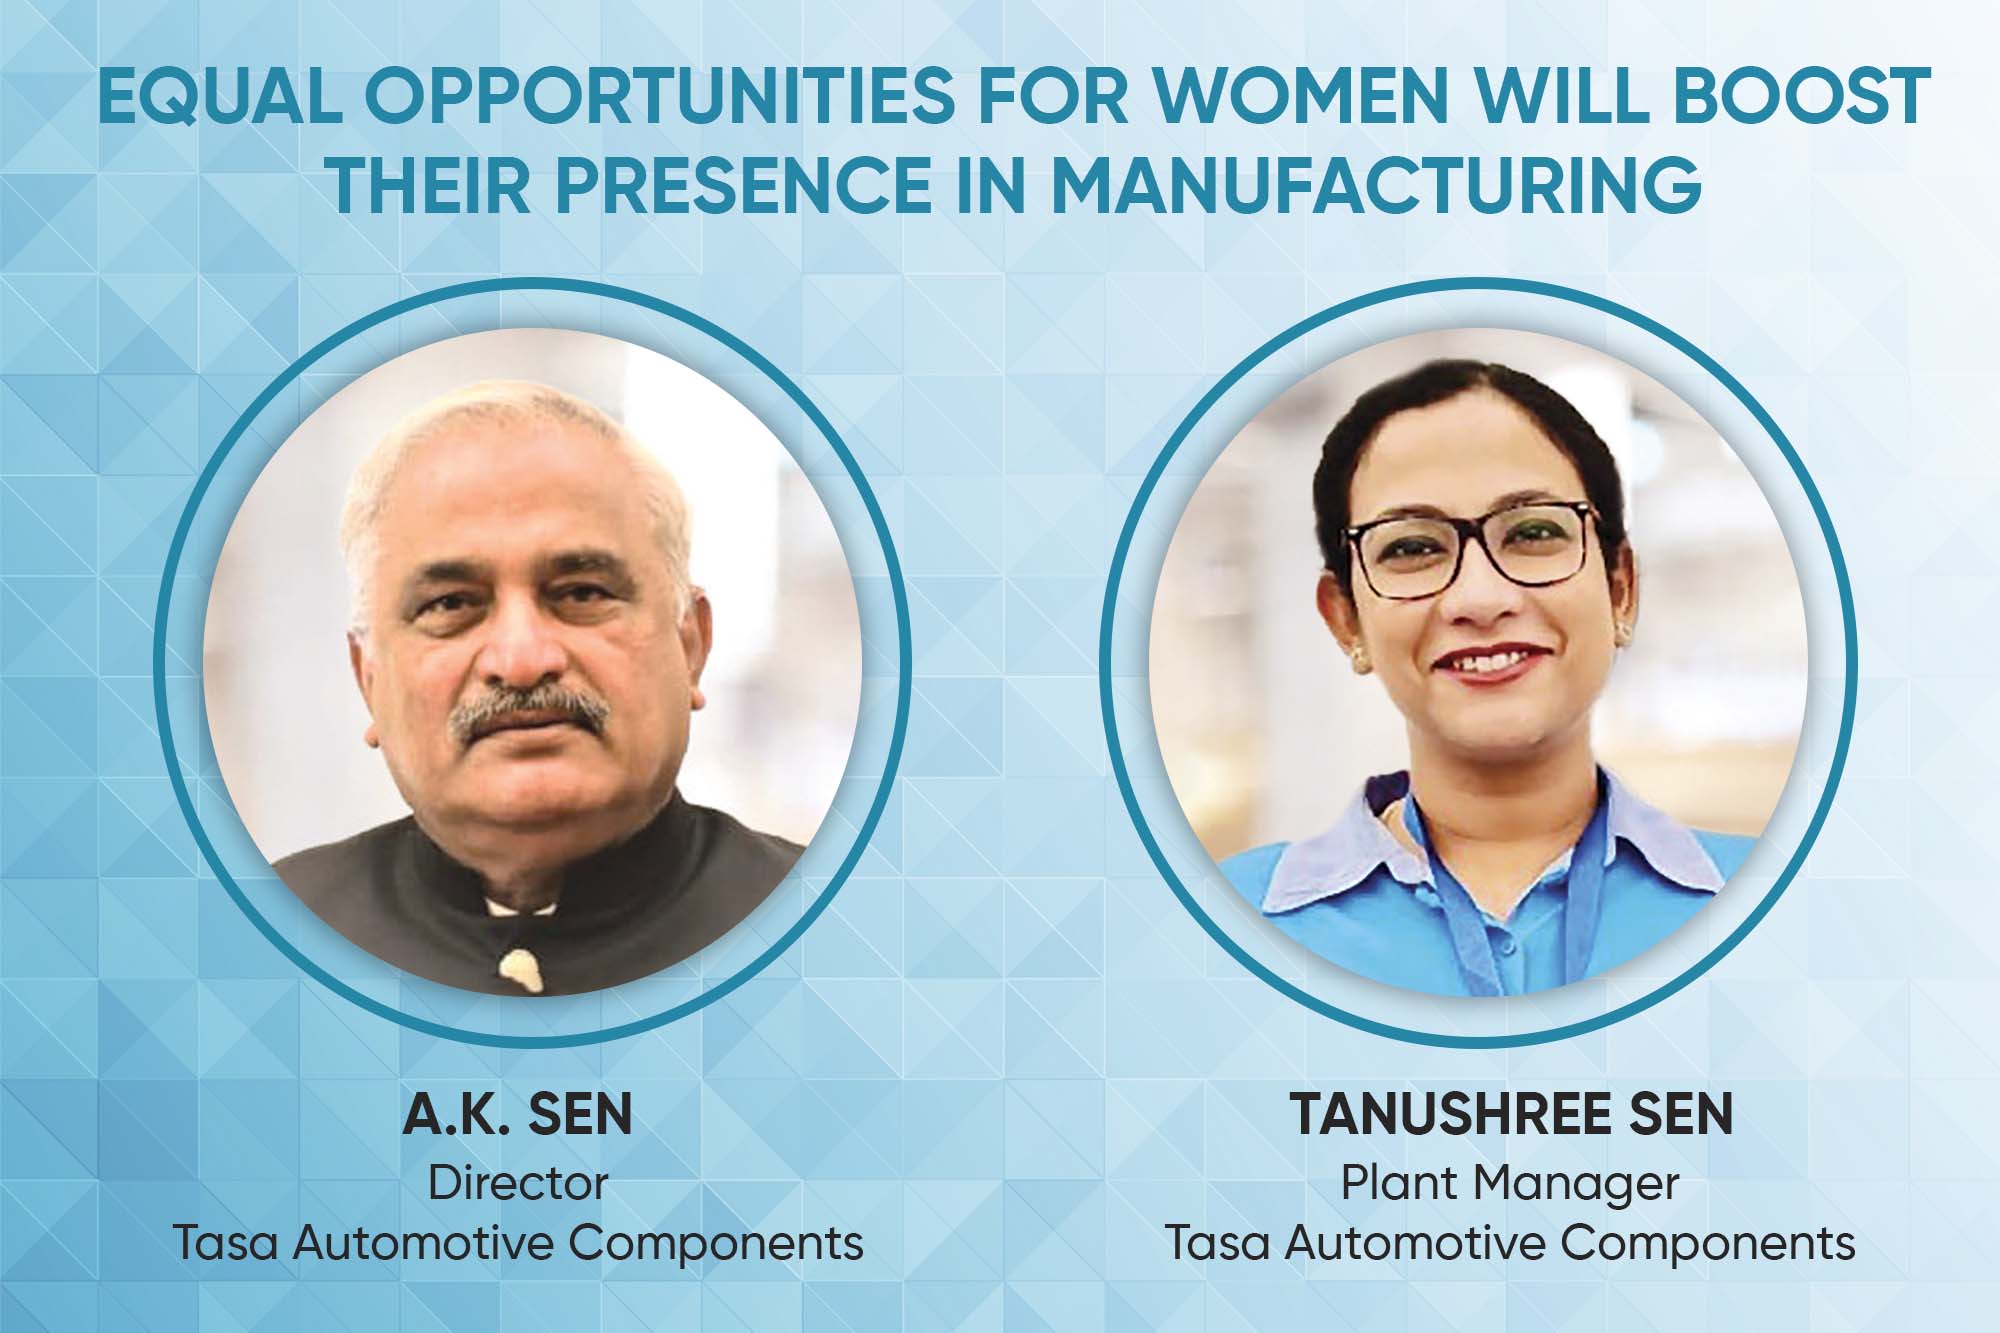 Equal opportunities for women will boost their presence in manufacturing